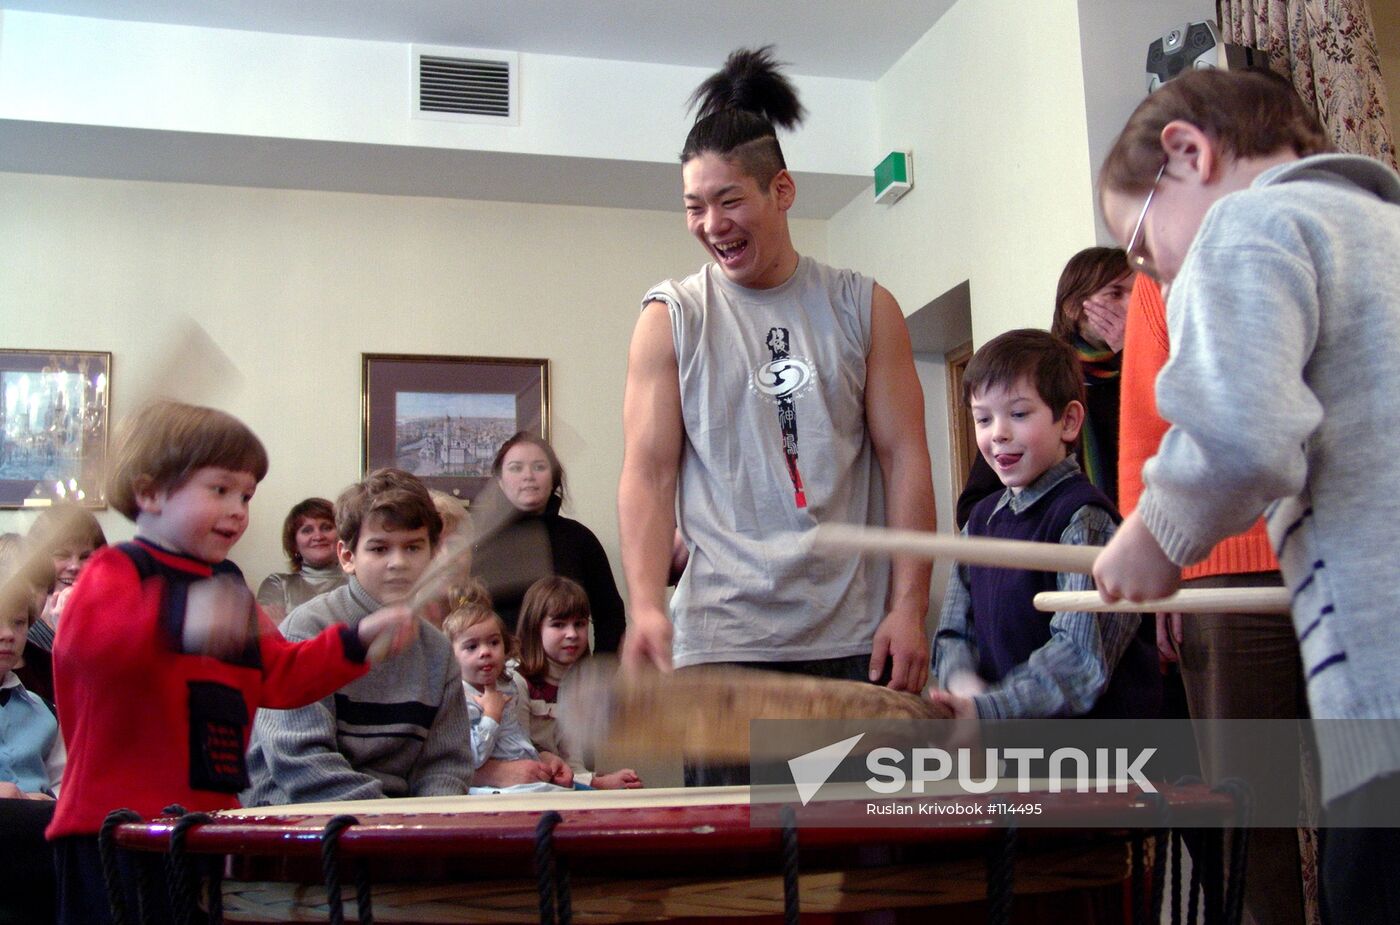 DRUMMERS JAPAN GUEST TOUR RUSSIA CHARITY CONCERT